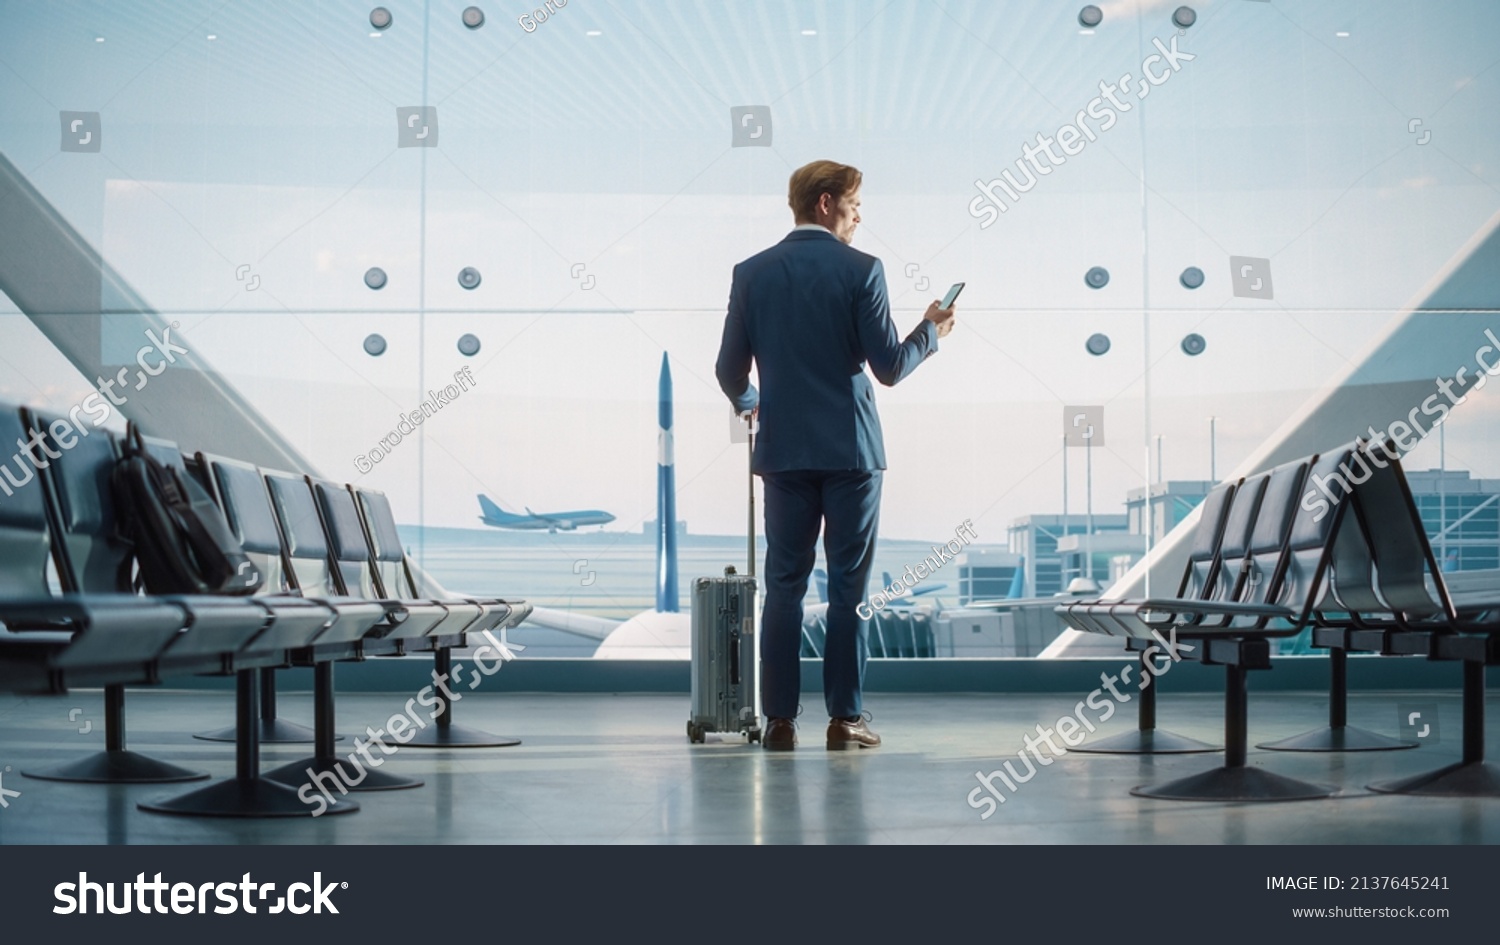 Airport Terminal: Businessman with Rolling Suitcase Walks, Uses Smartphone App for e-Business. Back View Silhouette of Traveling Man Waits for Flight in Boarding Lounge of Airline Hub with Airplanes #2137645241